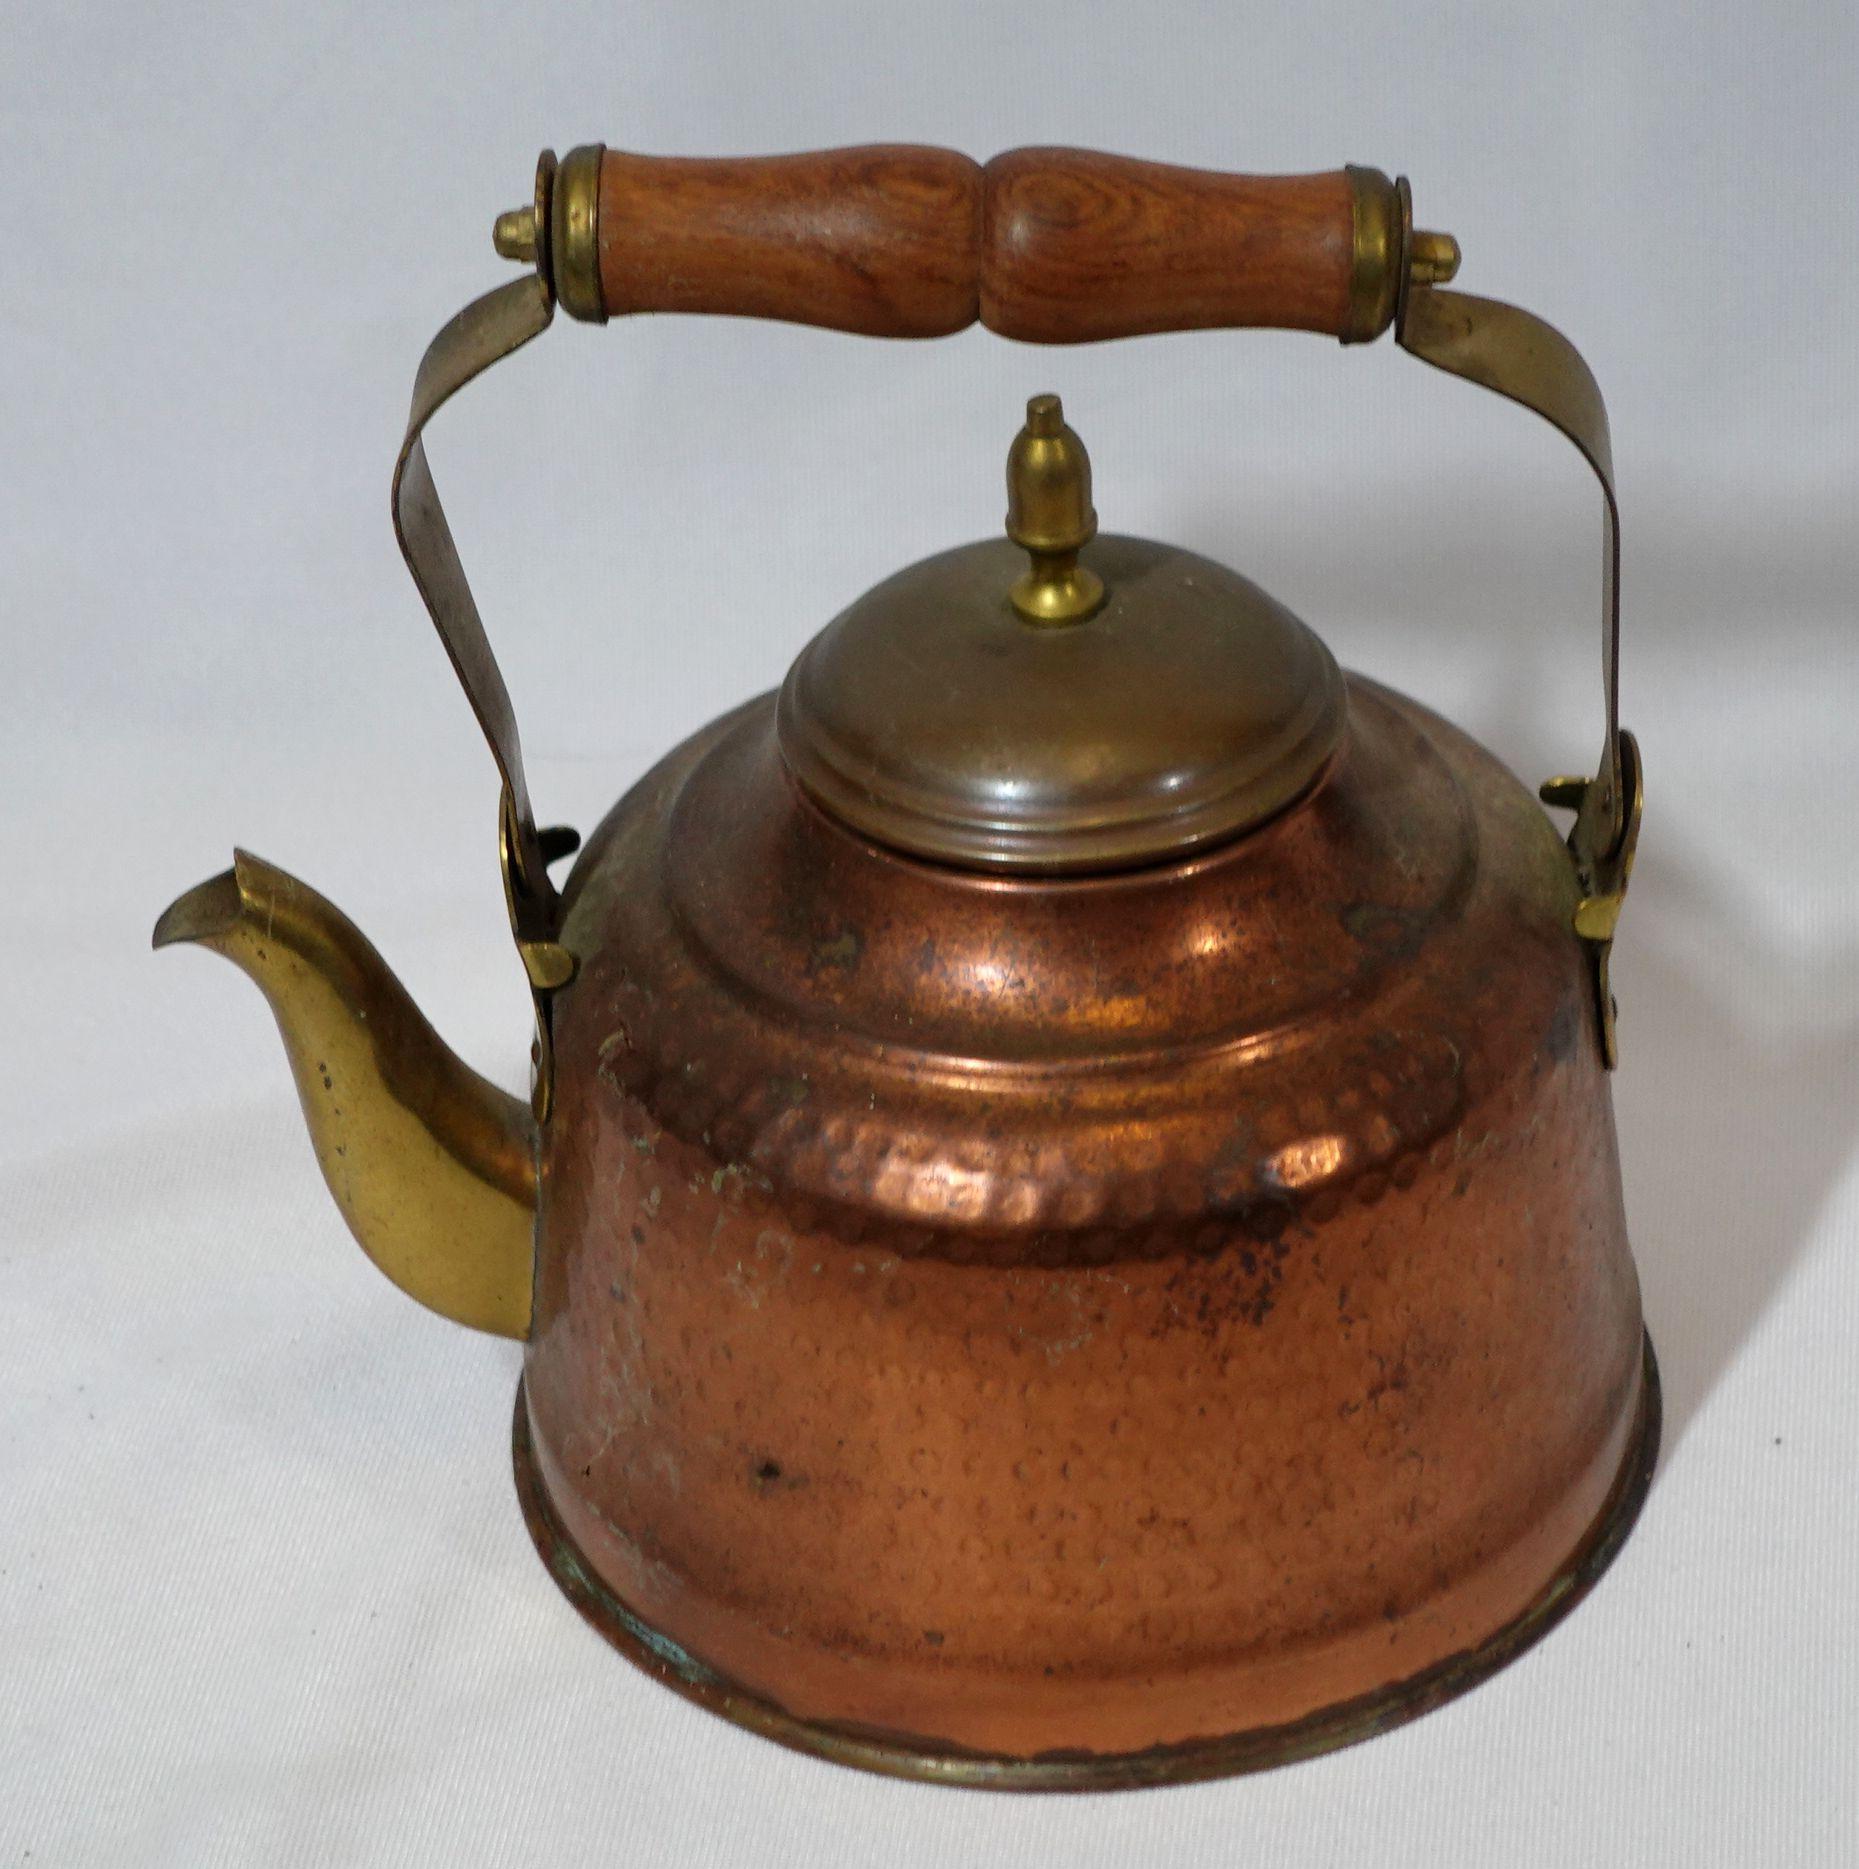 Hand-hammered copper and brass tea kettle made in India from the early 20th century, very well hand-made with delicate craftsmanship, and highly collectible antique.
